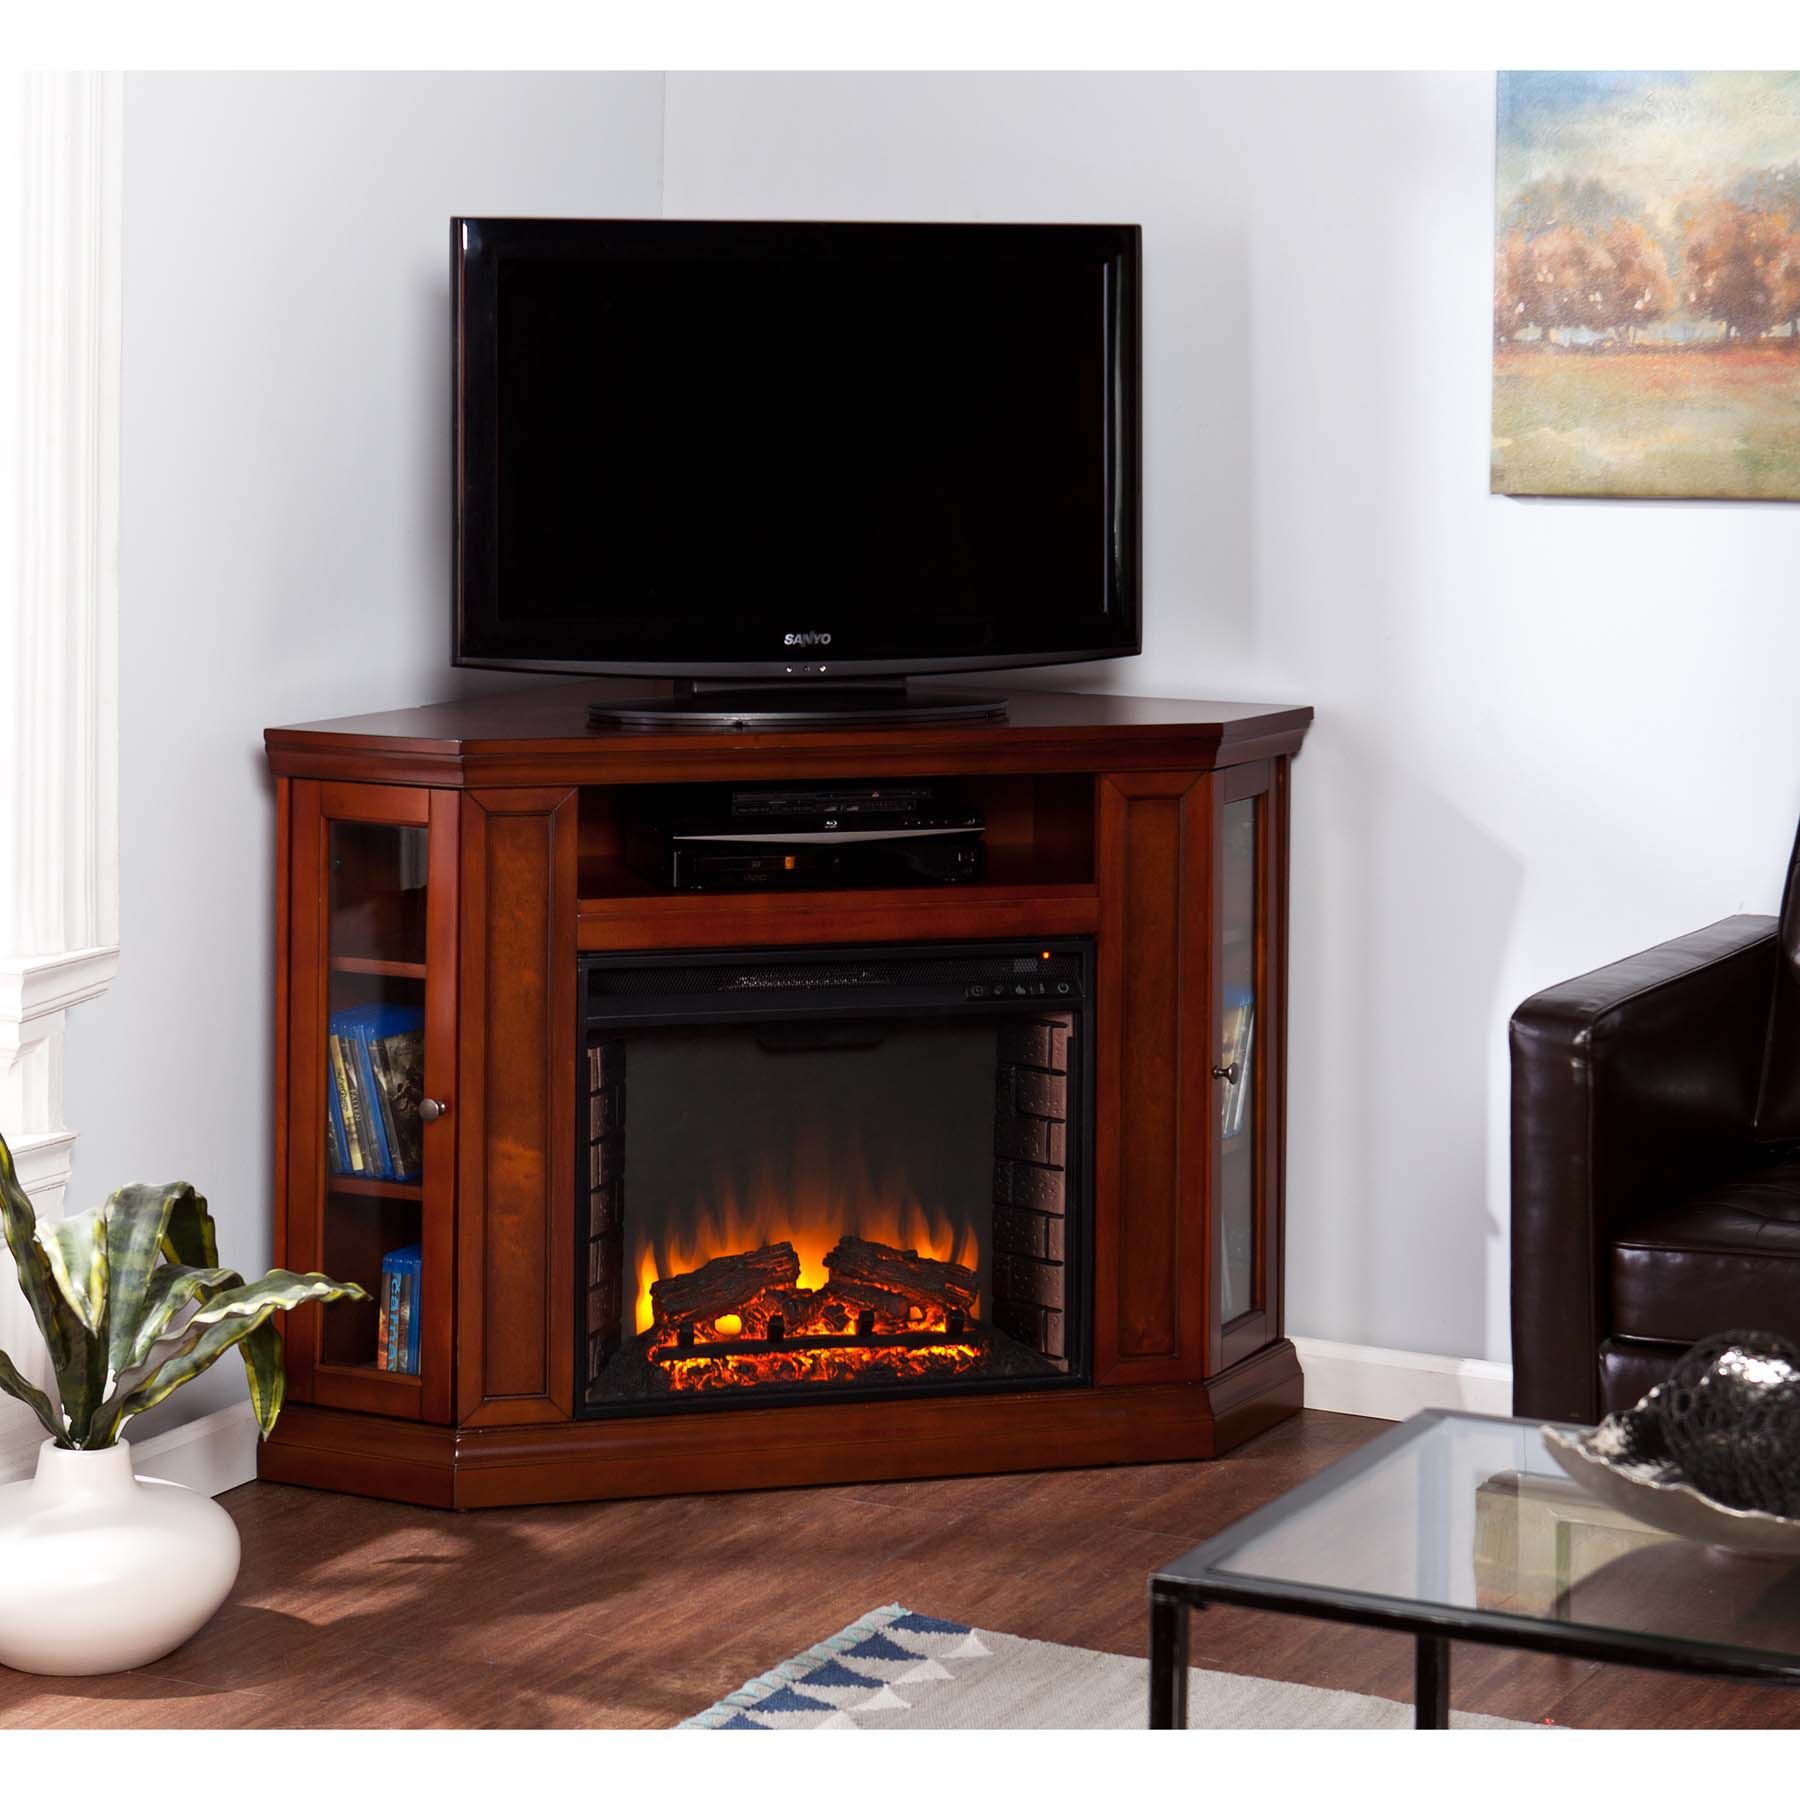 Mini Electric Fireplace Awesome 42 Best Rustic Fireplace Images